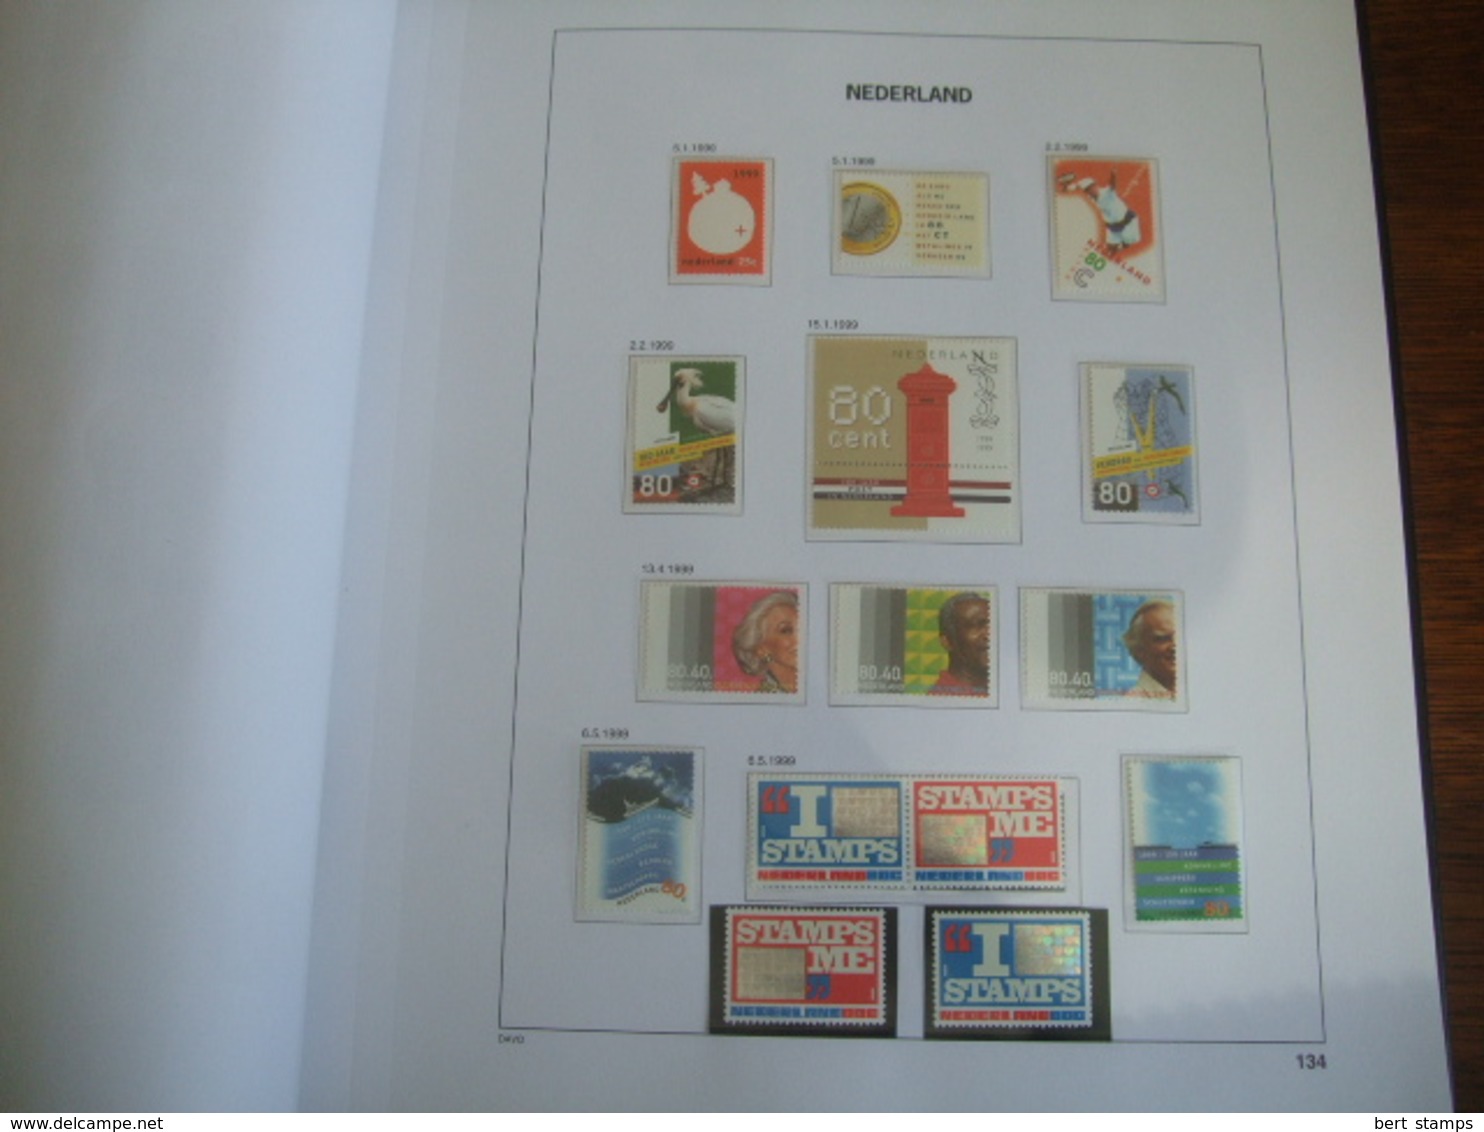 Collection Netherlands in DAVO LUXE album 1996 till 1999 MNH including extra sheets